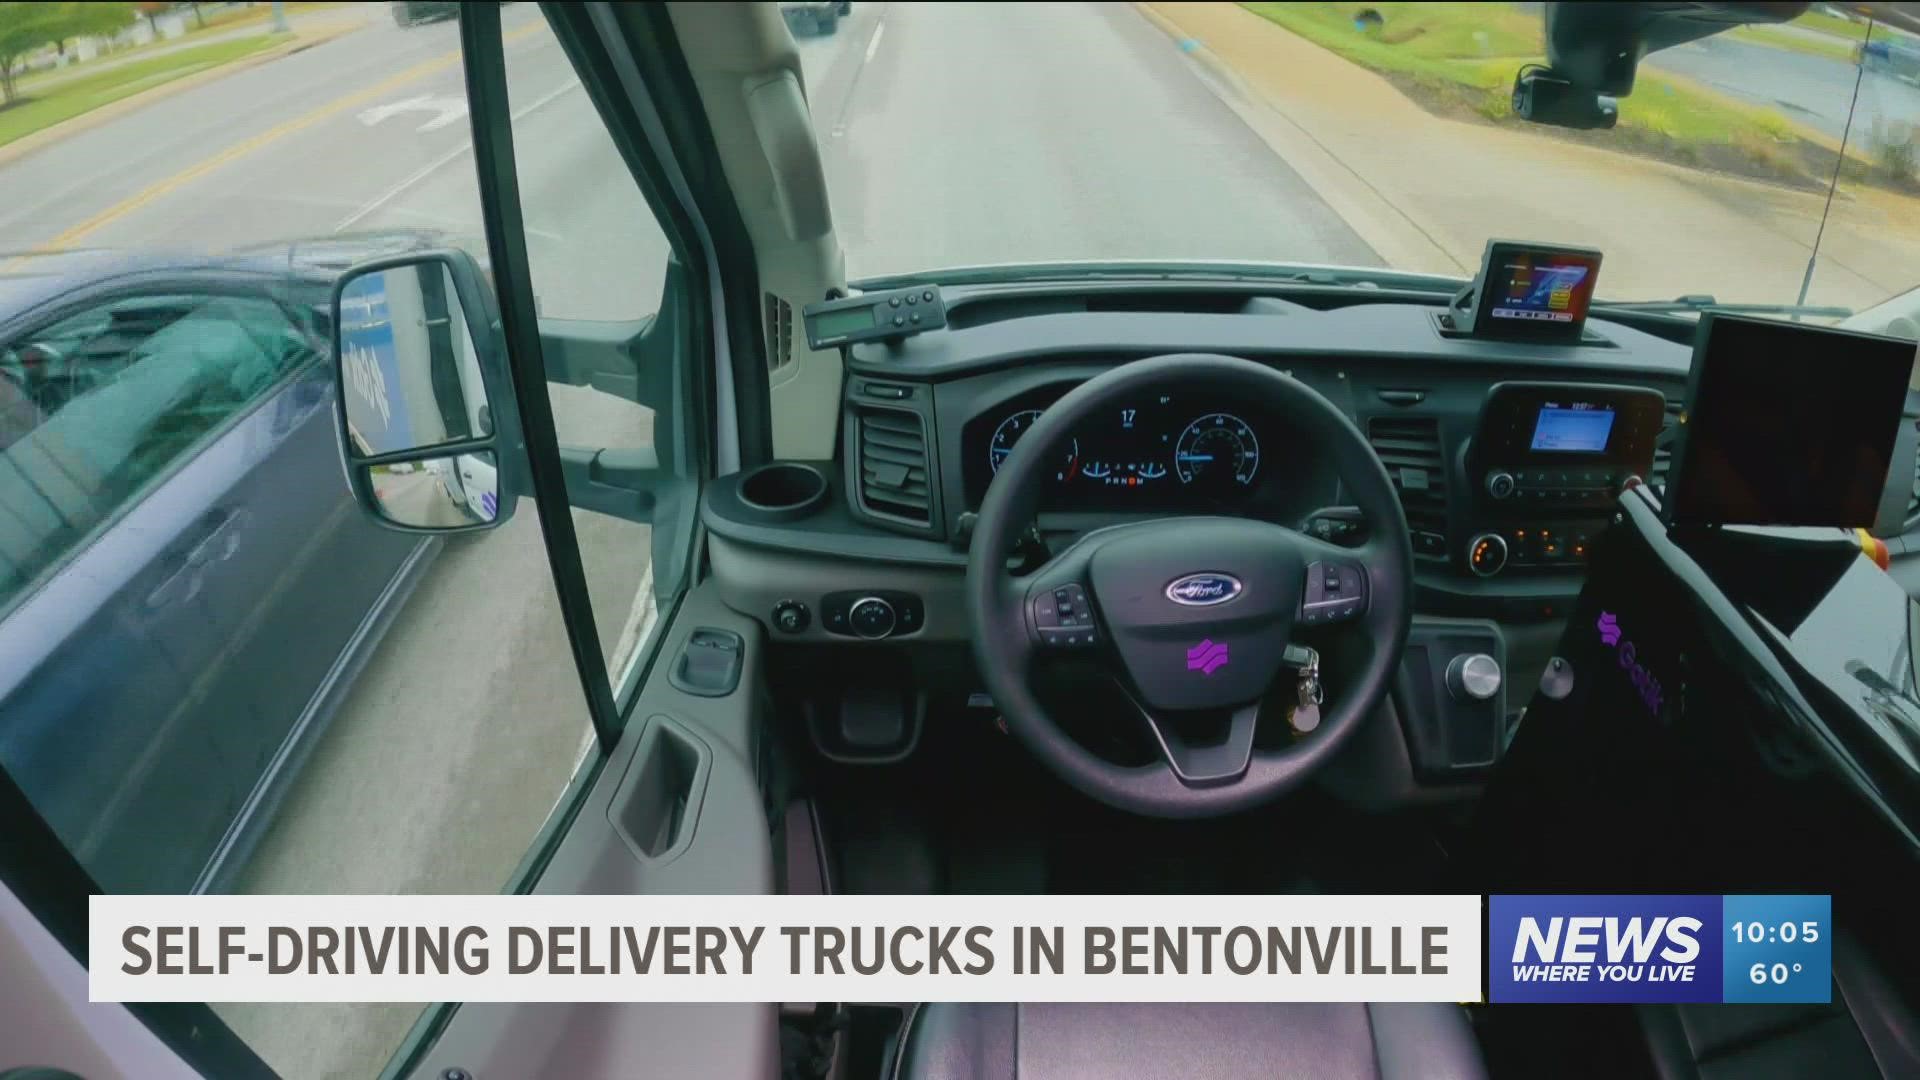 Bentonville residents will soon see driverless box trucks on the road delivering for Walmart. https://bit.ly/3og0umI